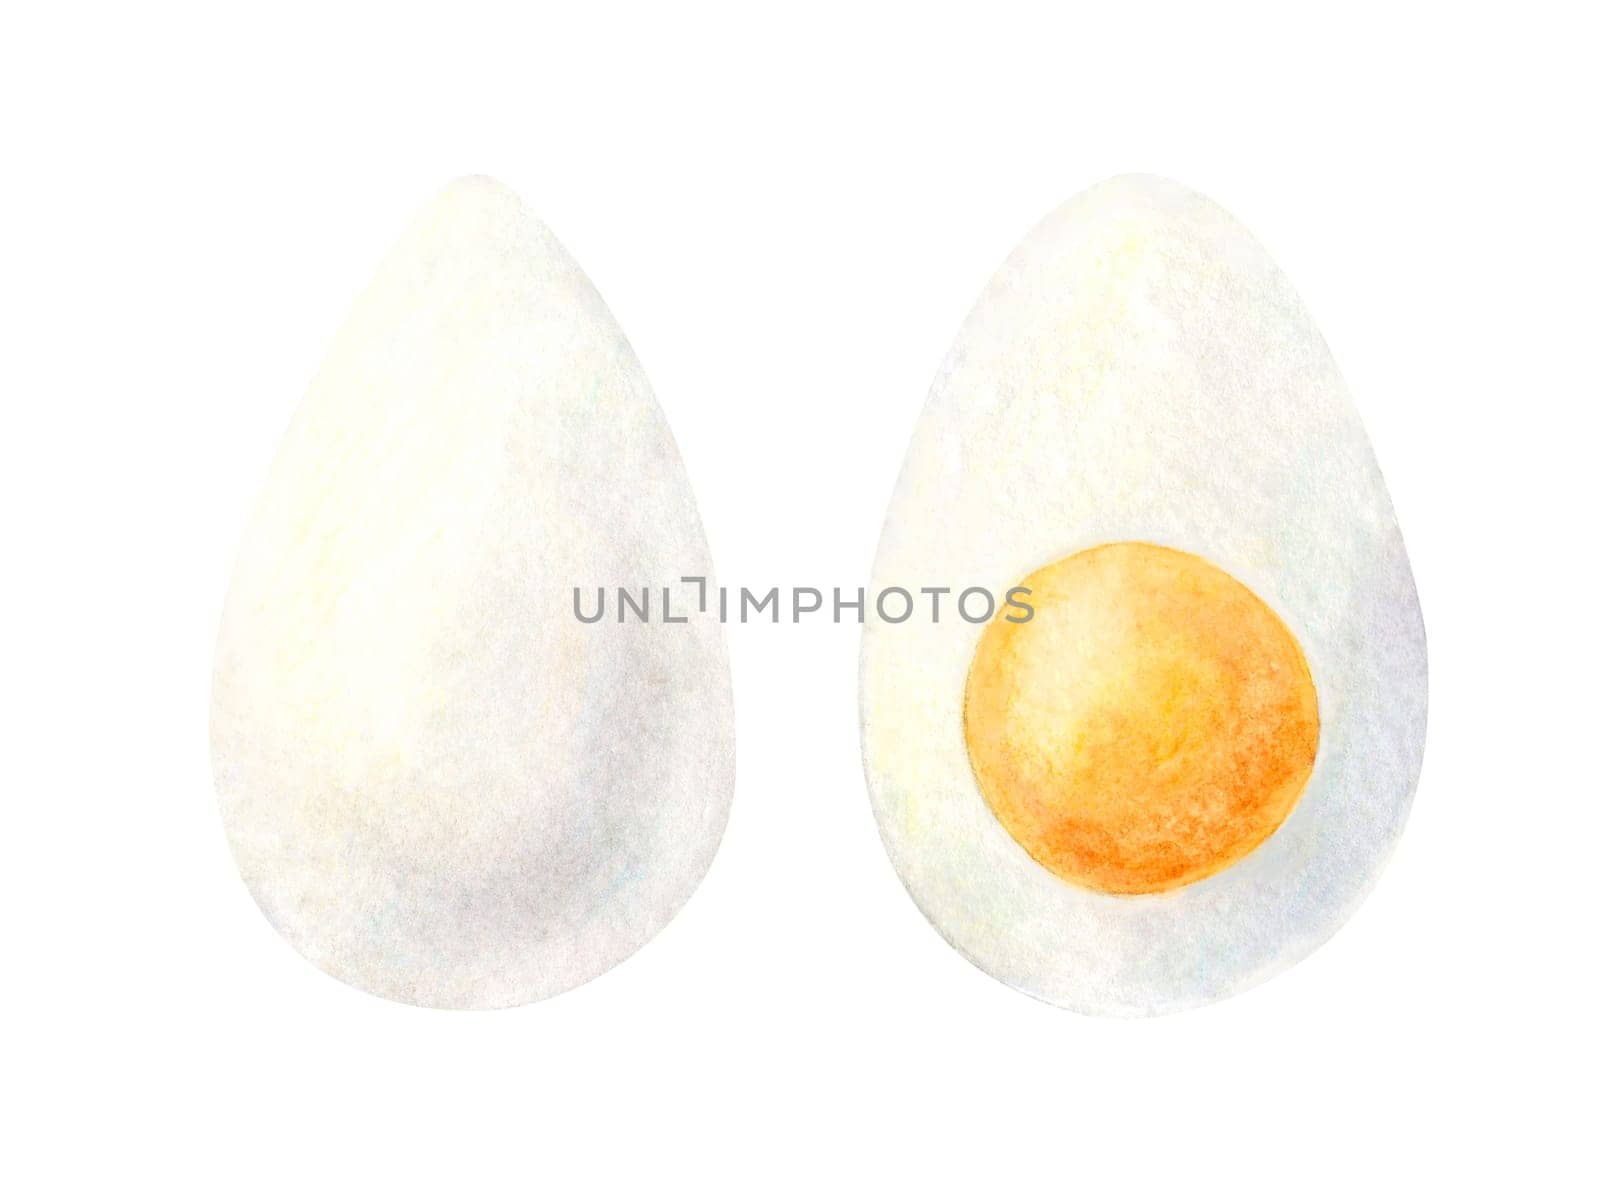 Watercolor painting set of boiled eggs illustration isolated on white background. Half of sliced egg for breakfast. Hand drawn ingredients for restaurant menu, receipt, label, packaging design.